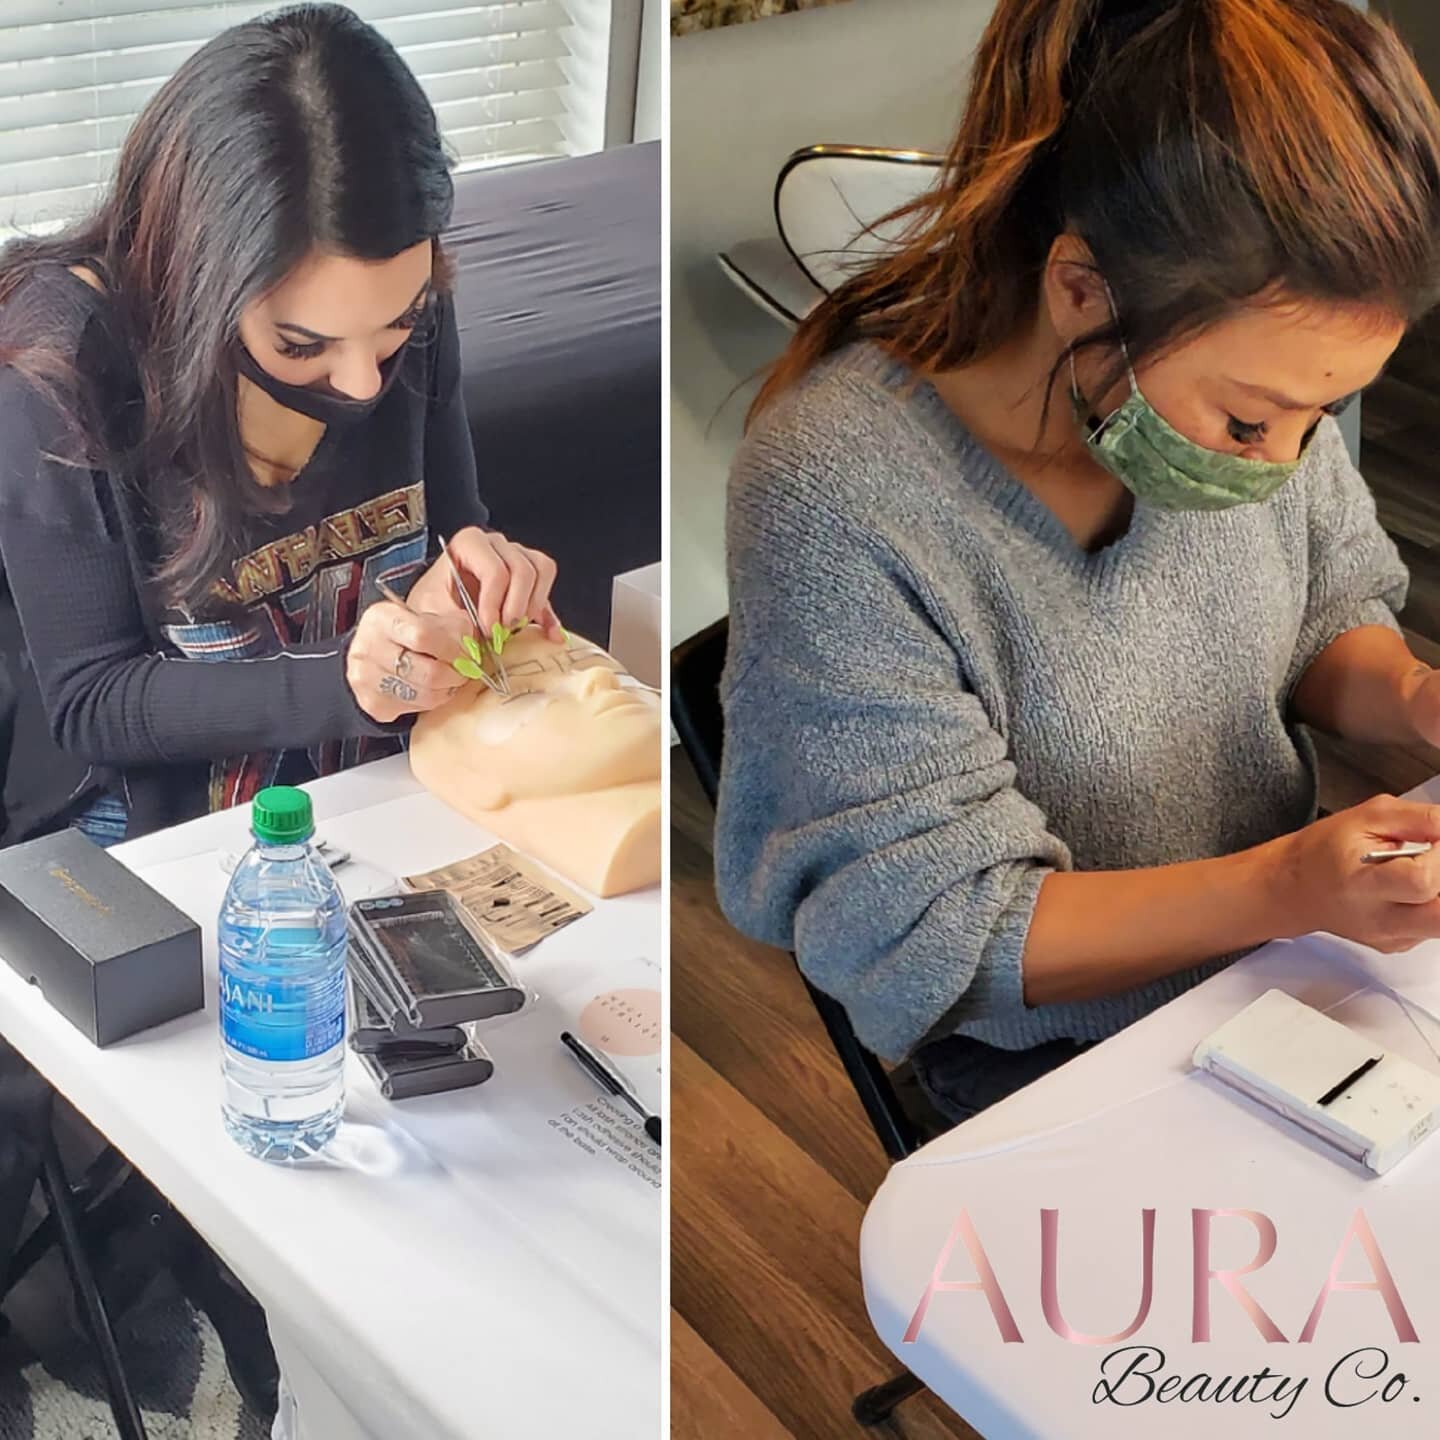 Training day! These beauty babes learning allll the lash knowledge in our combined fundamentals + mega volume lash course! This could be you! This course is for those wanting to learn as much as possible very quickly! 
.
Aura-beautyco.com for upcomin